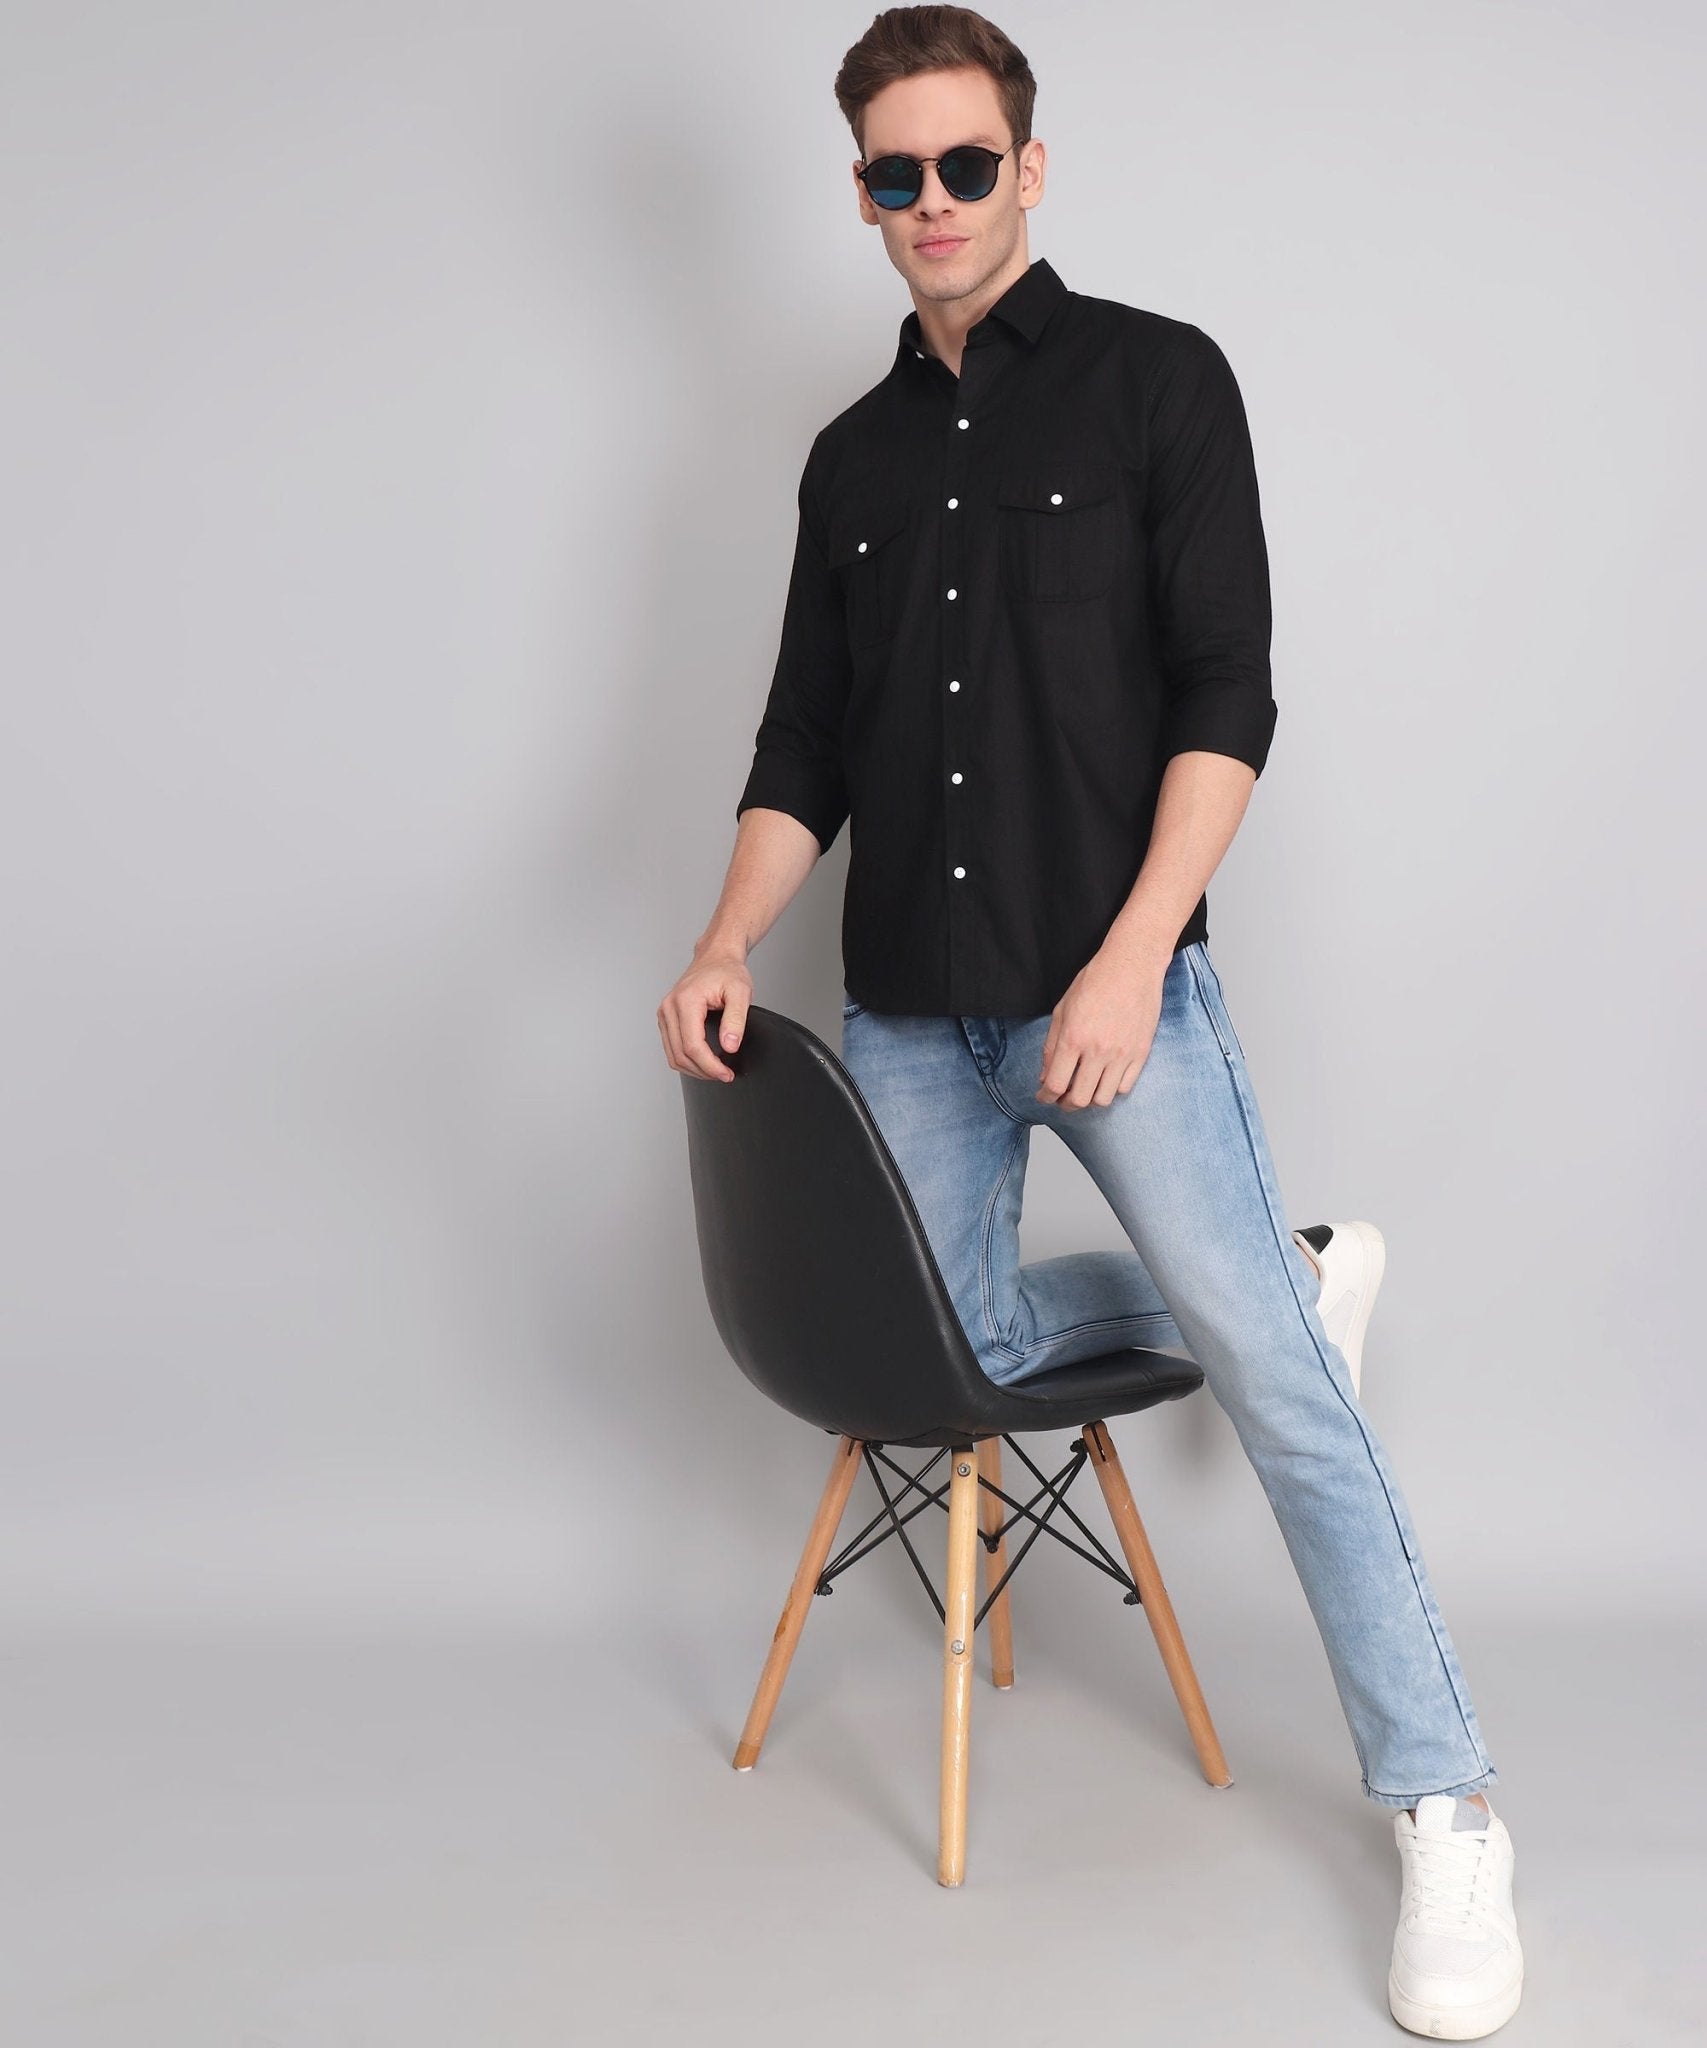 TryBuy Premium Black Solid Cotton Linen Casual Double Pocket Shirt for Men - TryBuy® USA🇺🇸